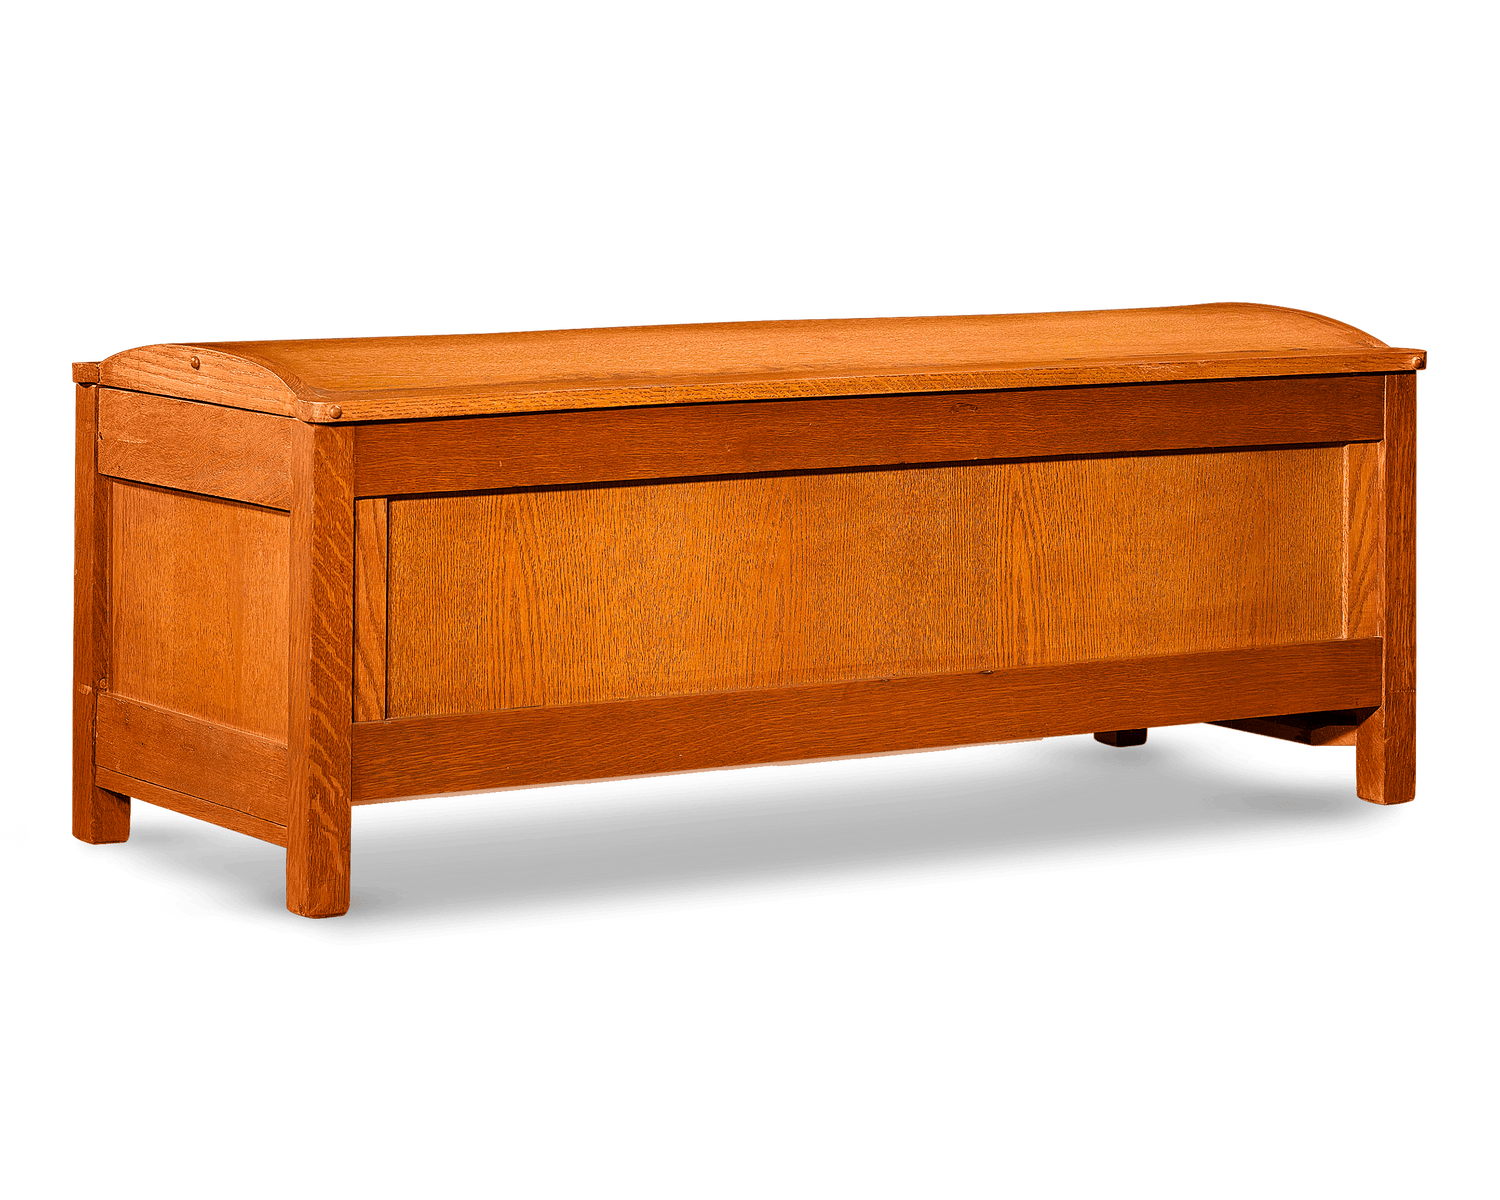 A matching chest holds nine table leaves